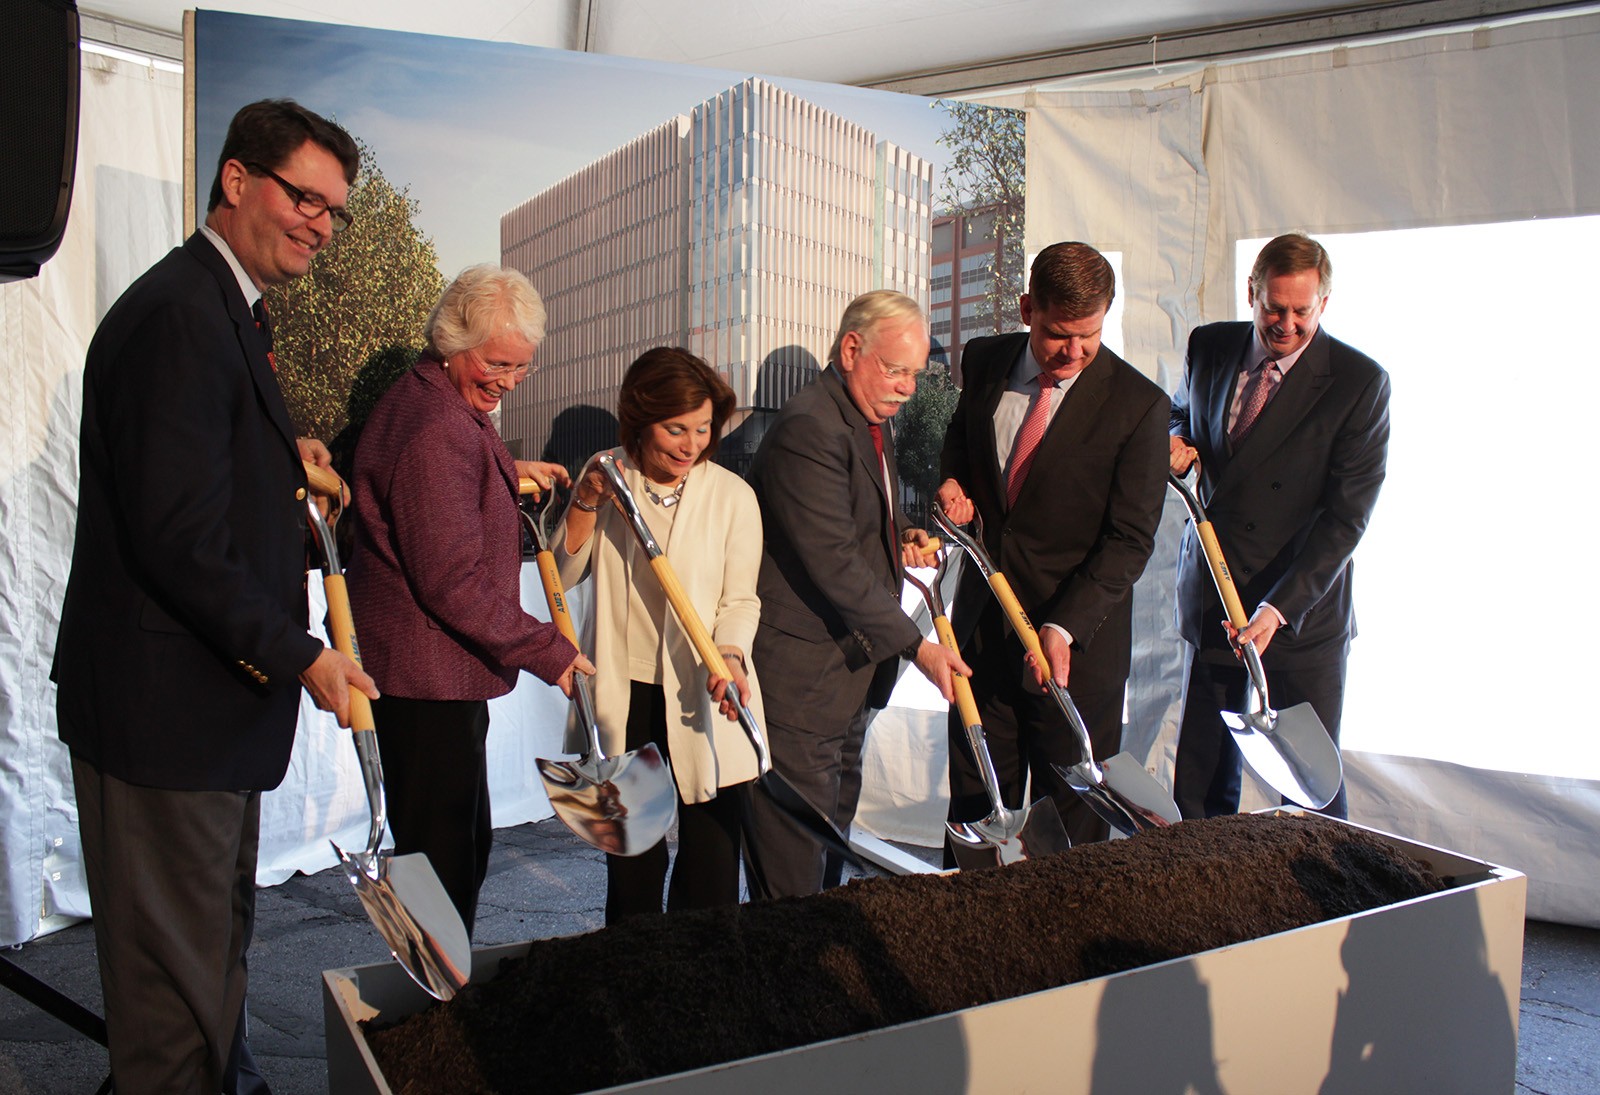 From left, J. Kenneth Menges,  Jean Morrison, Gloria Waters, Boston University President Robert Brown, Boston Mayor Martin Walsh and Robert Knox break ground on Boston University's Center for Integrated Life Sciences and Engineering Thursday. PHOTO BY FELICIA GANS/ DAILY FREE PRESS STAFF